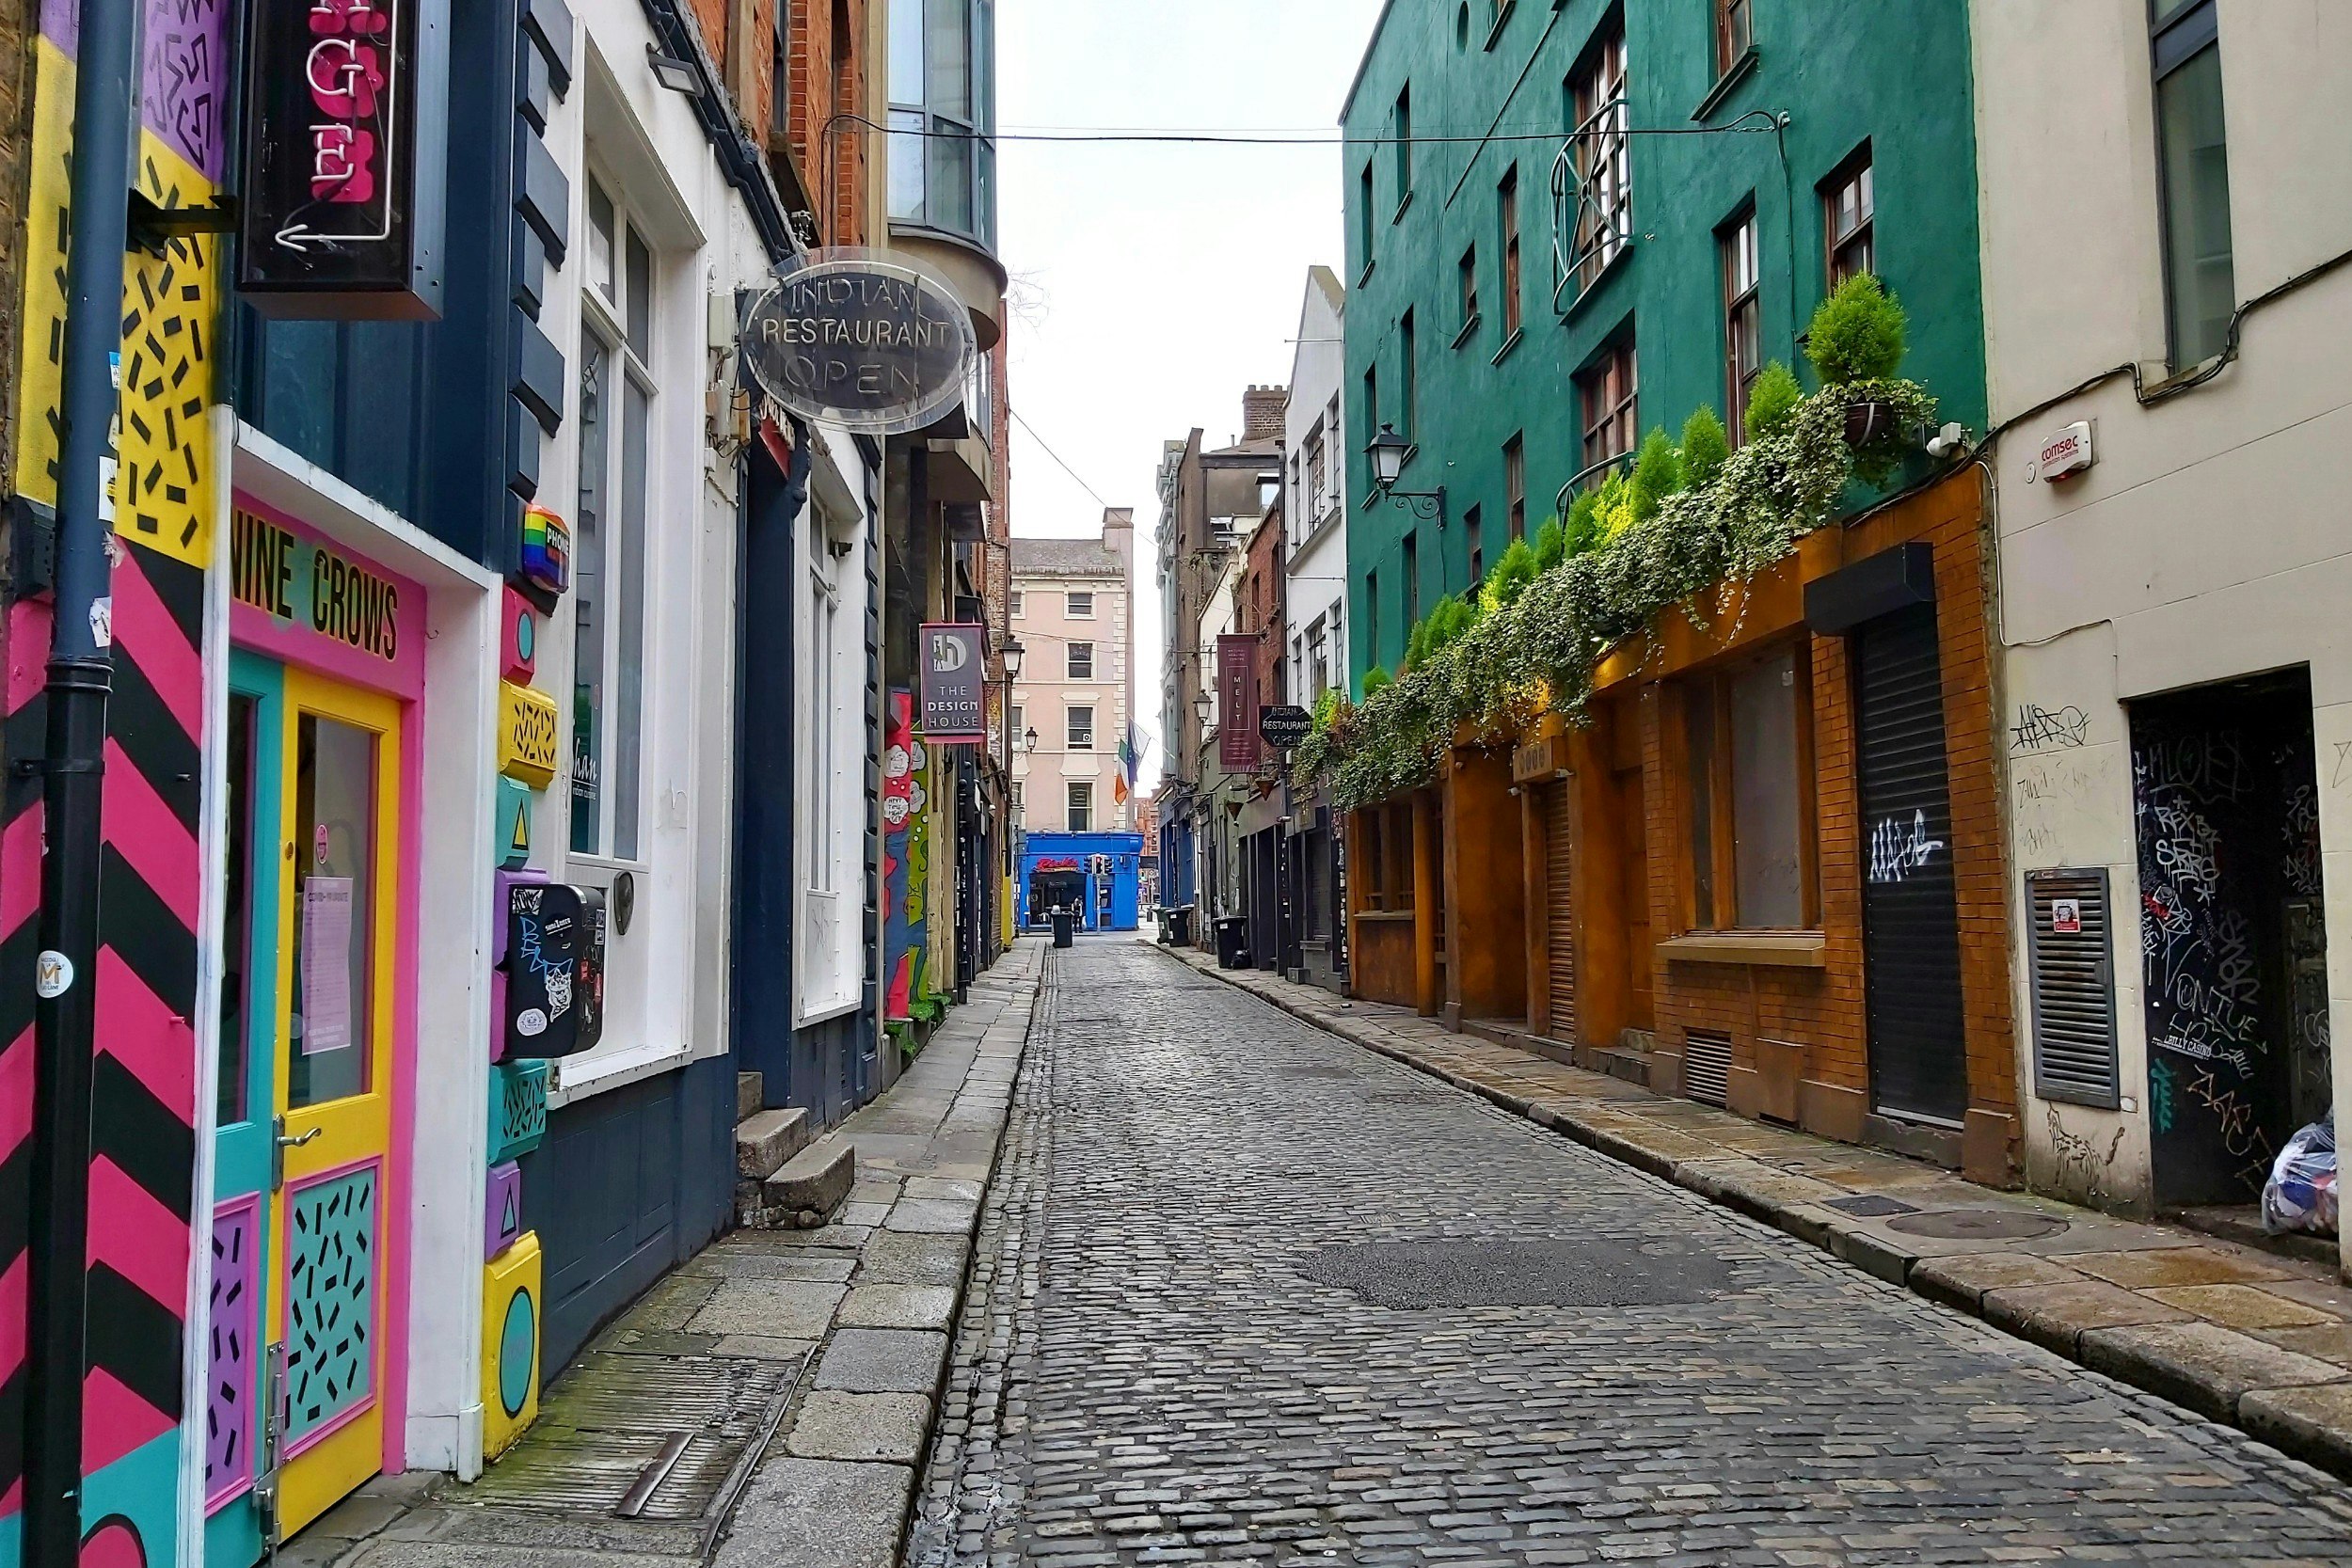 The empty streets of Temple Bar